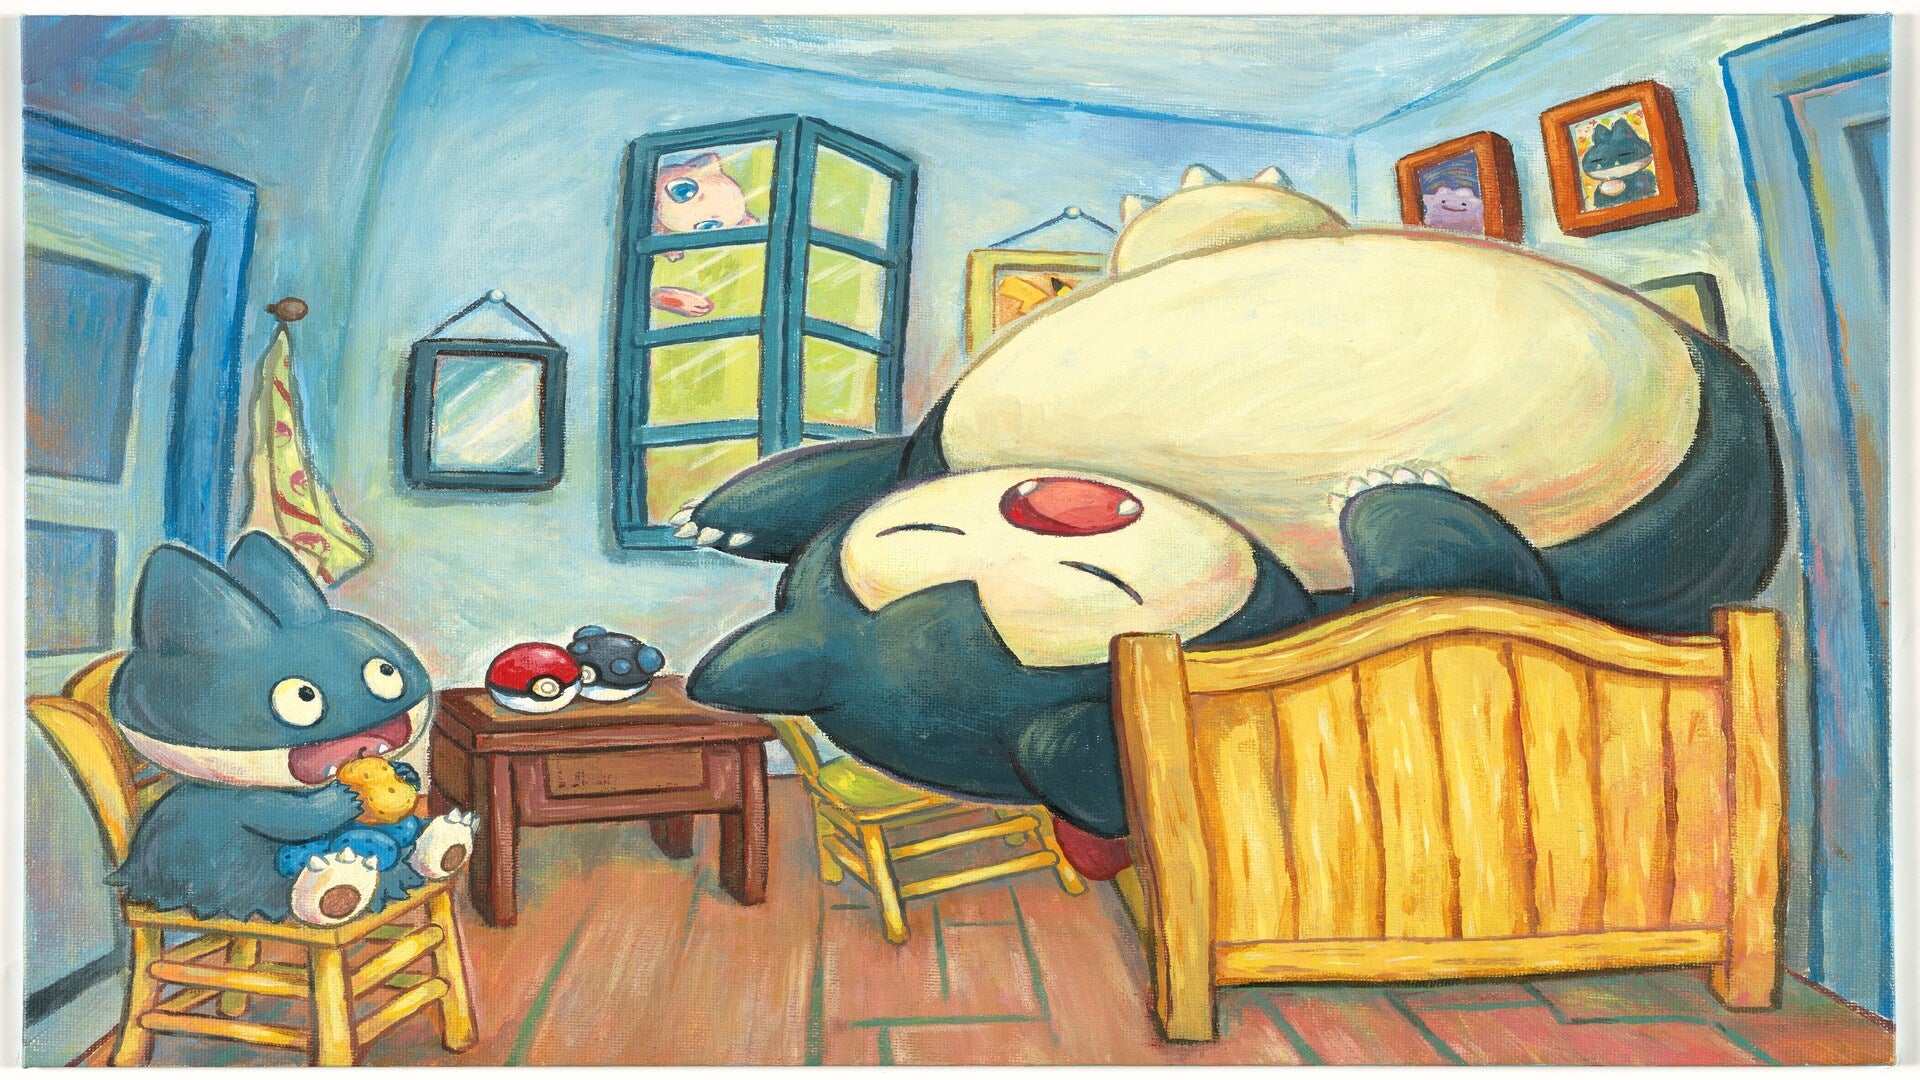 Pokemon partners with Van Gogh Museum for adorable TCG art collab 